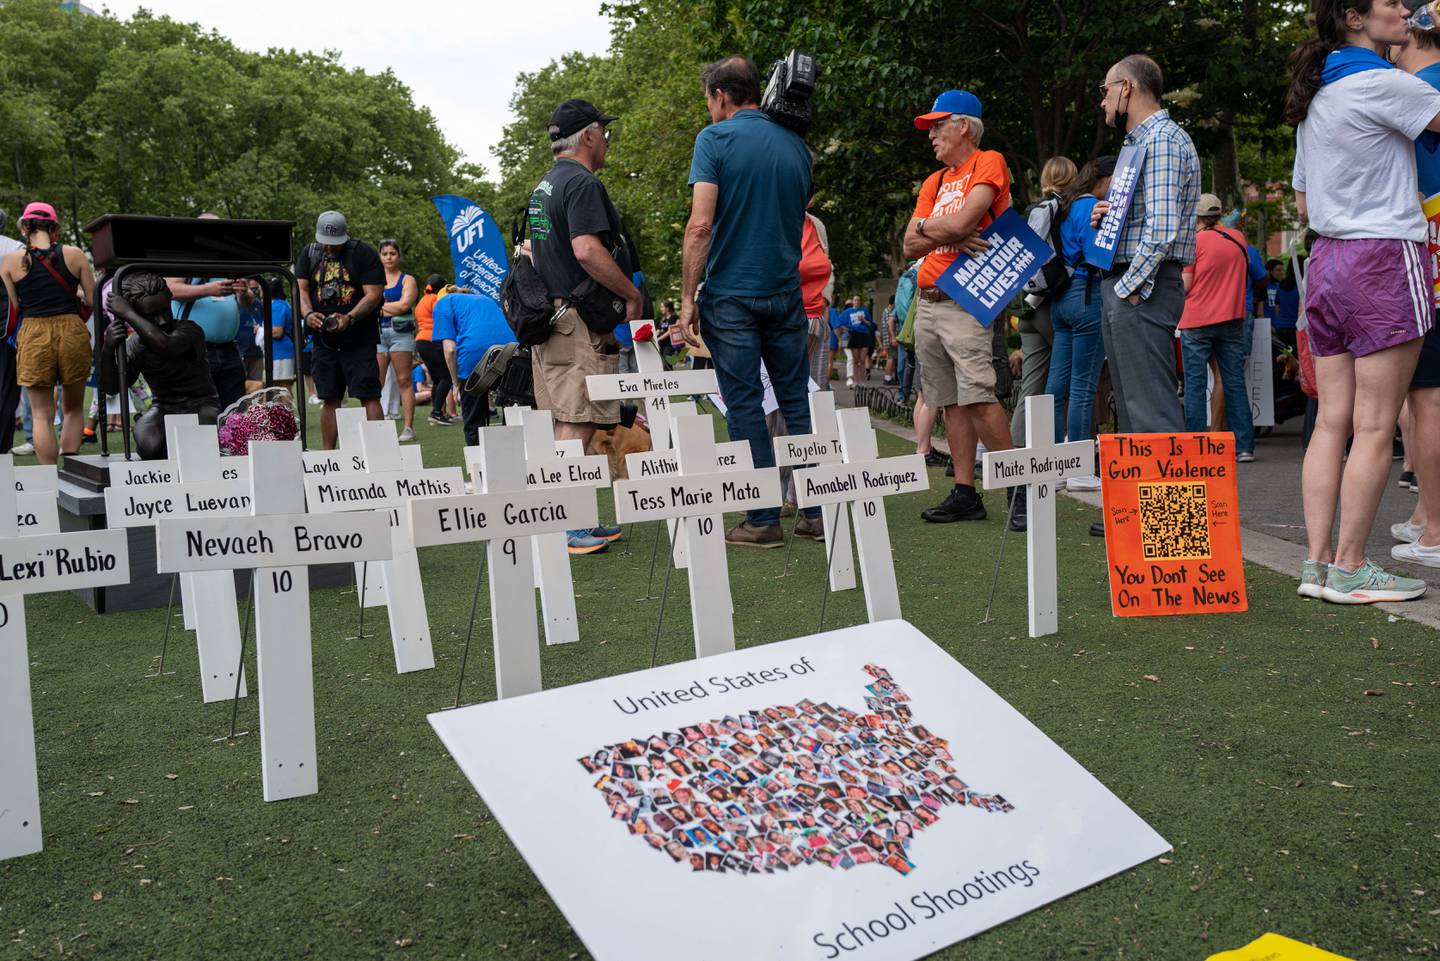 A memorial of white crosses is erected to the children killed in Uvalde, Texas at the starting point of the March for Our Lives protest on in Brooklyn, New York. Getty